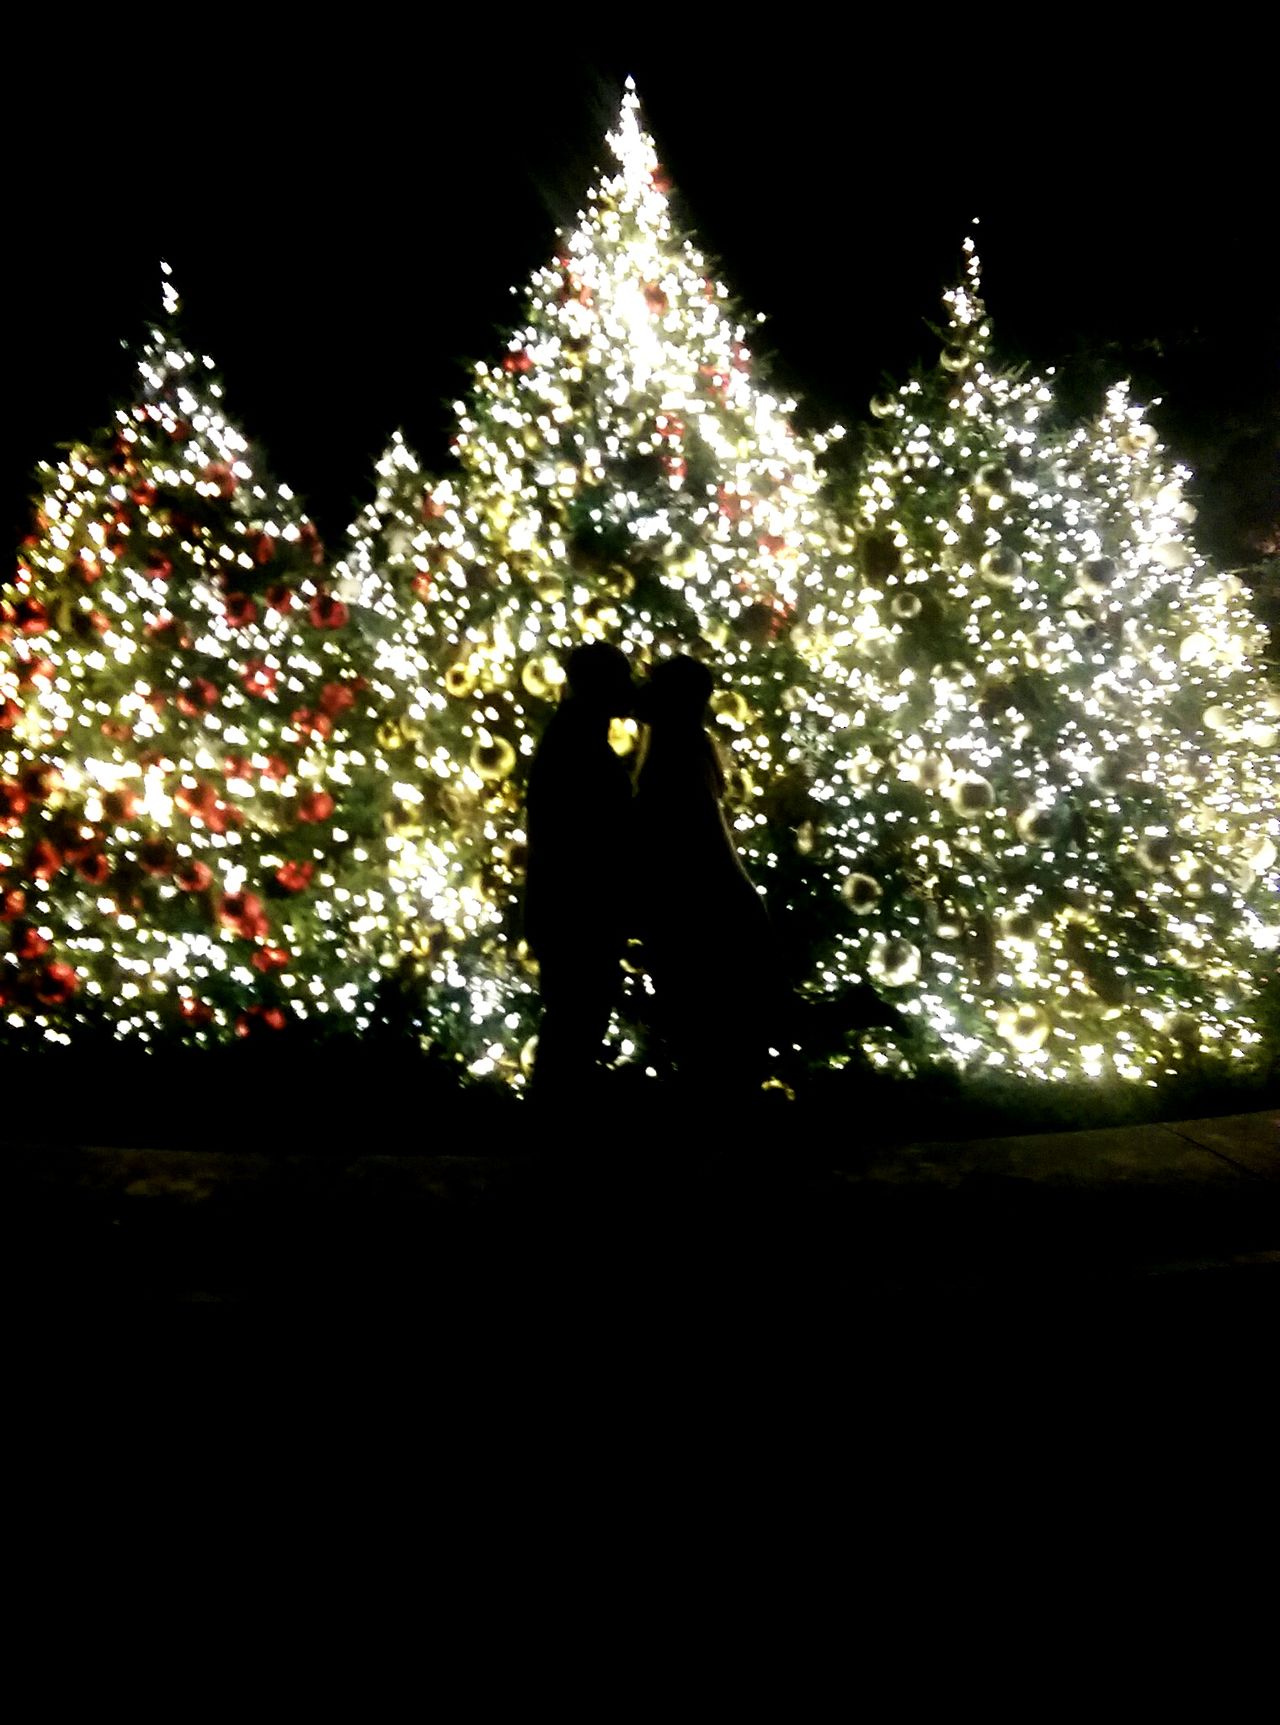 Kiss by the tree